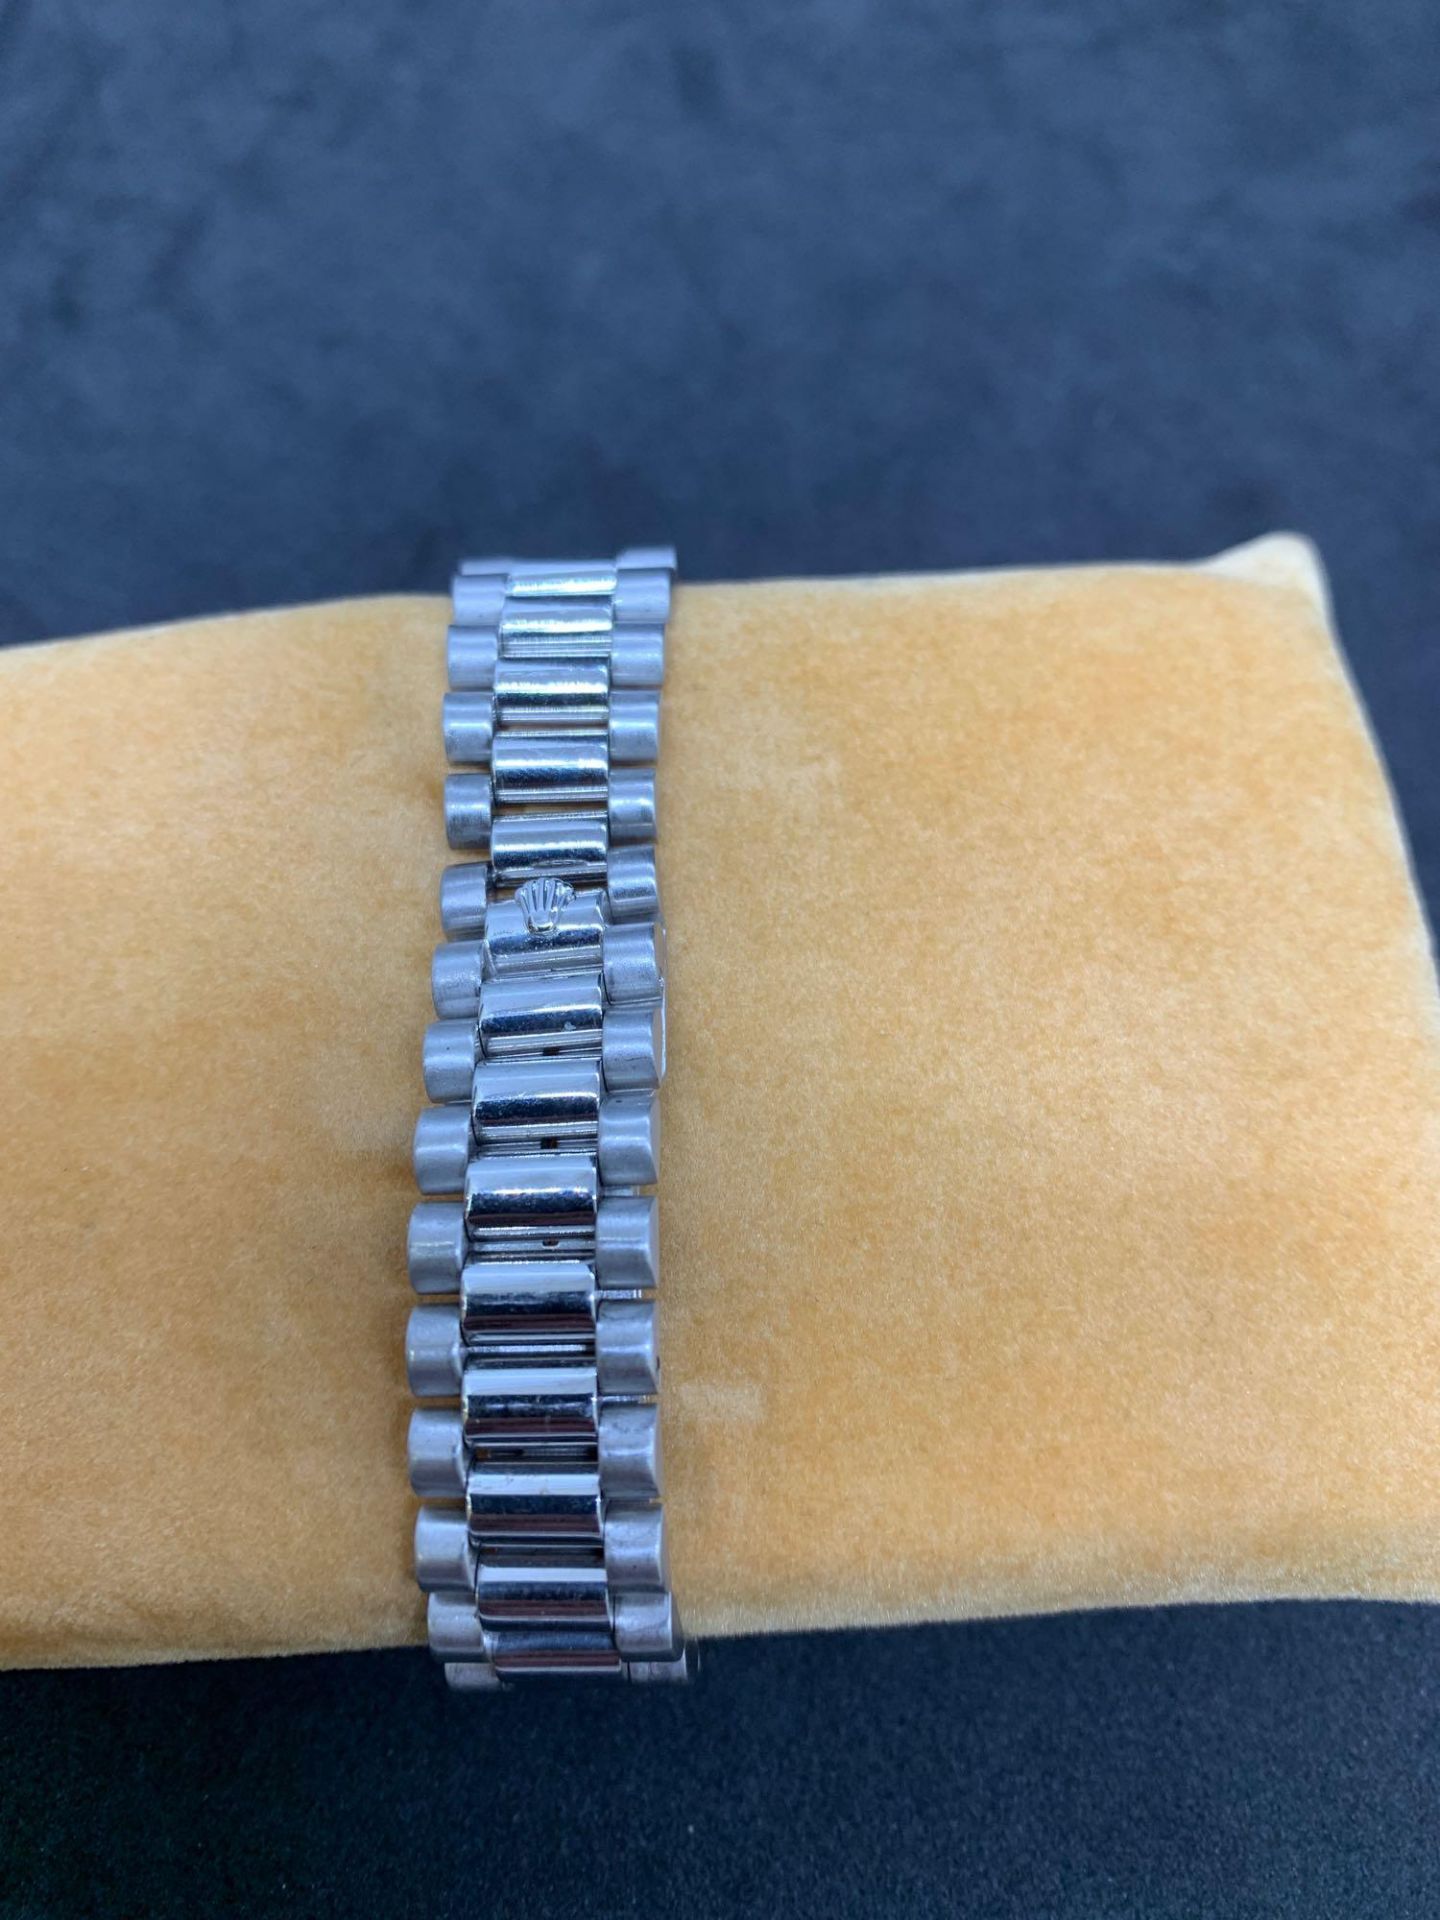 18ct White gold 31mm Rolex Watch - Image 3 of 7